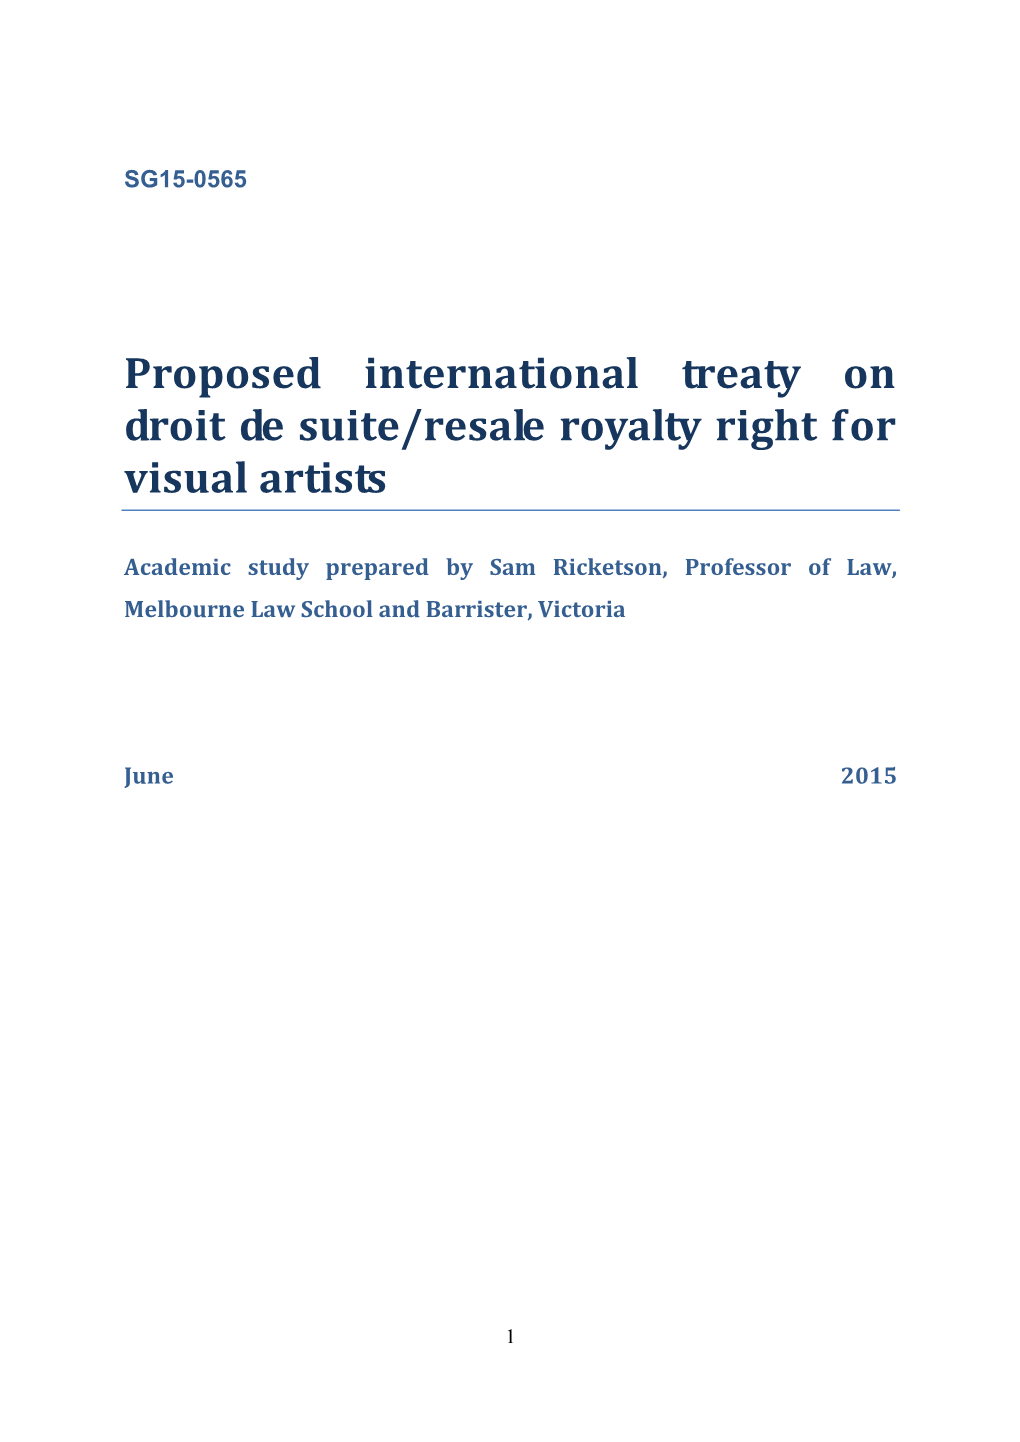 Proposed International Treaty on Droit De Suite/Resale Royalty Right for Visual Artists